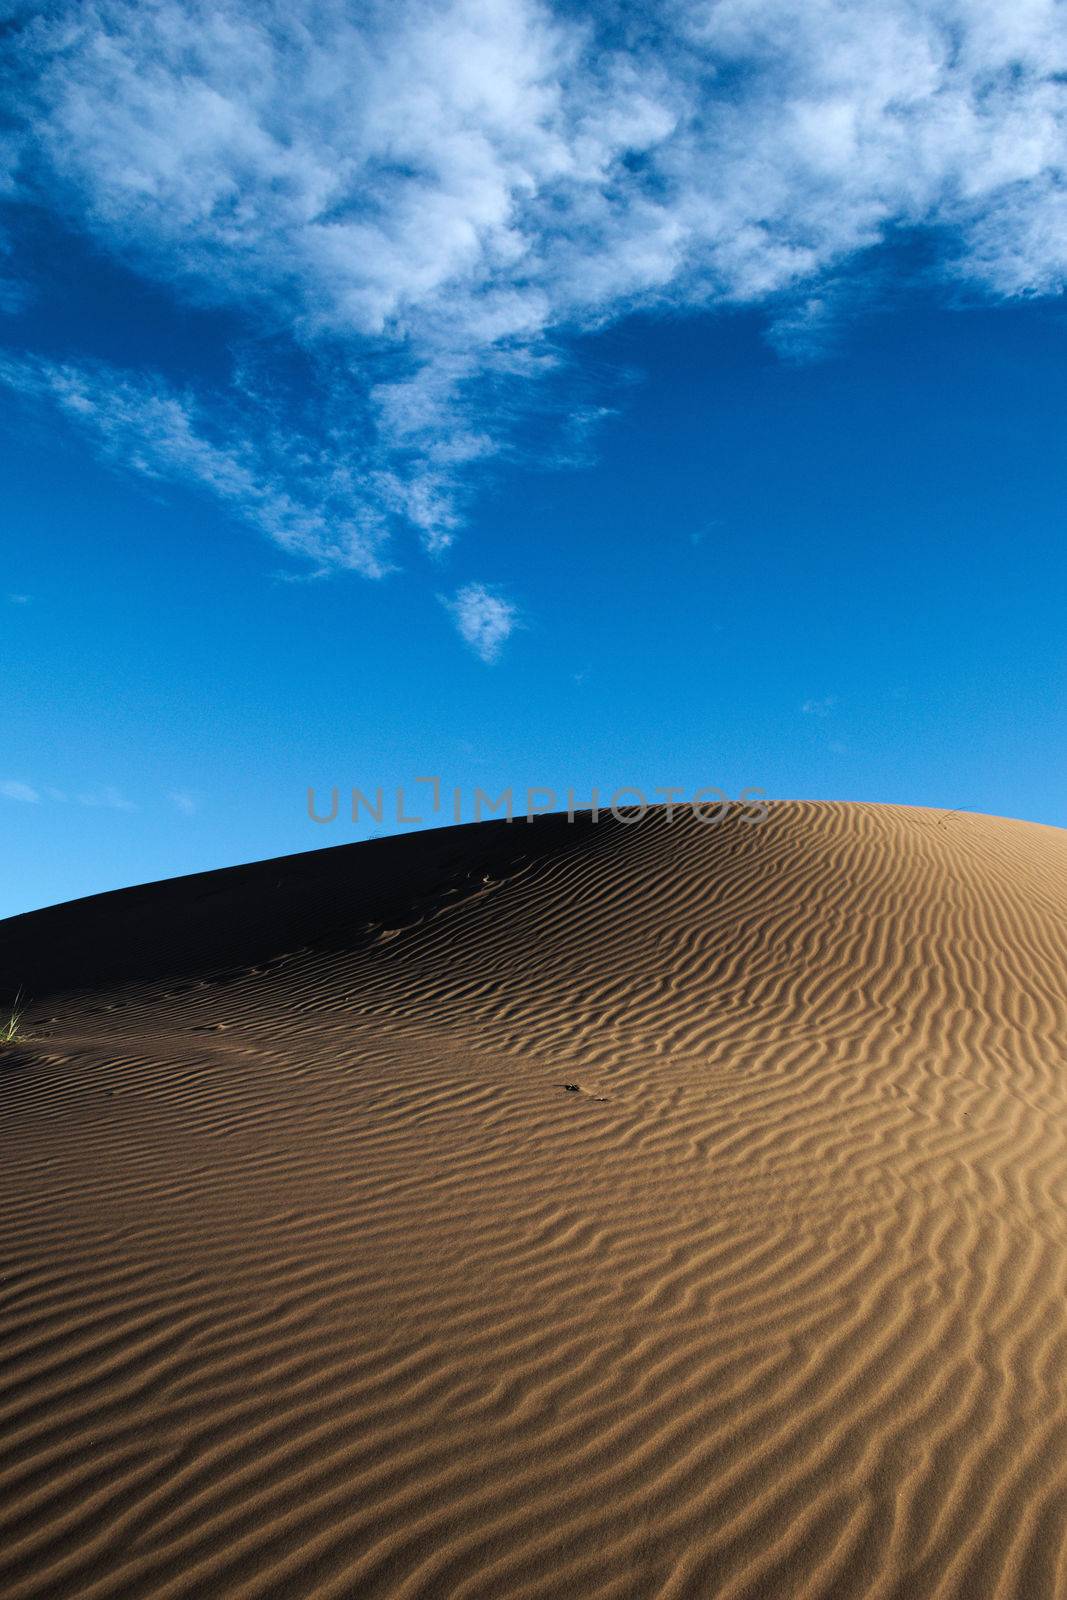 Large sand dune beneath a blue sky with clouds, in the desert of Lavalle, province of Mendoza, Argentina